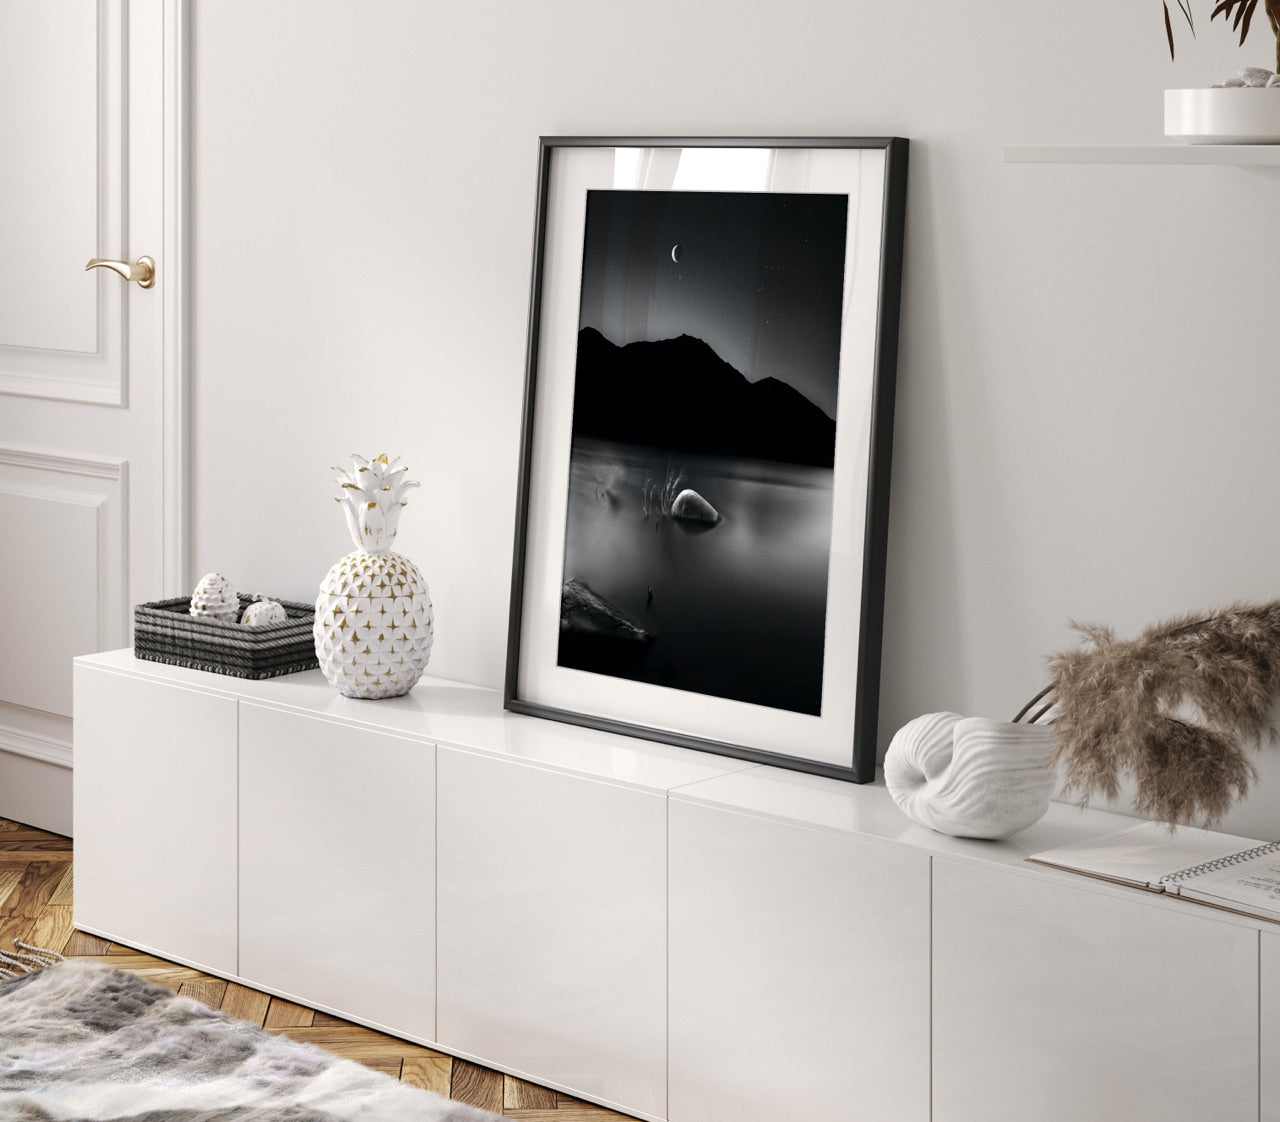 Framed black and white photograph in living room